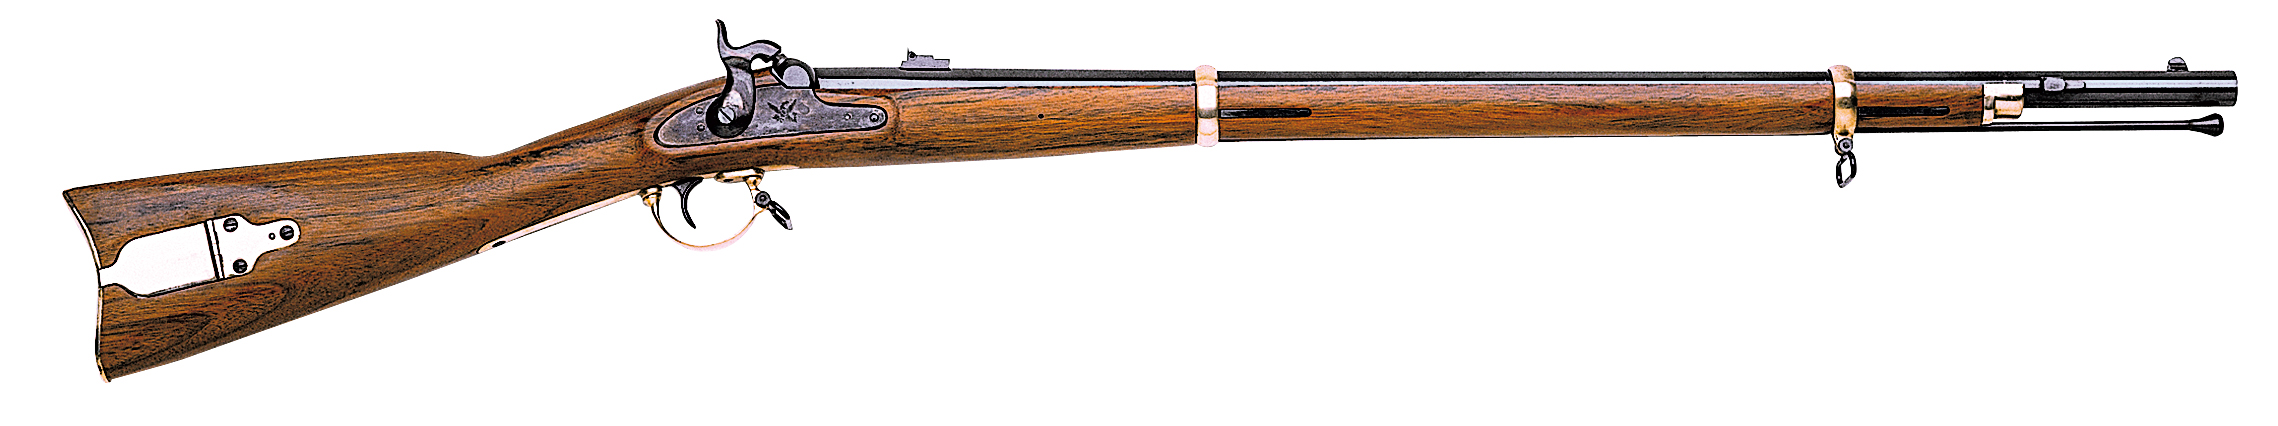 Traditions 1863 Zouave Musket